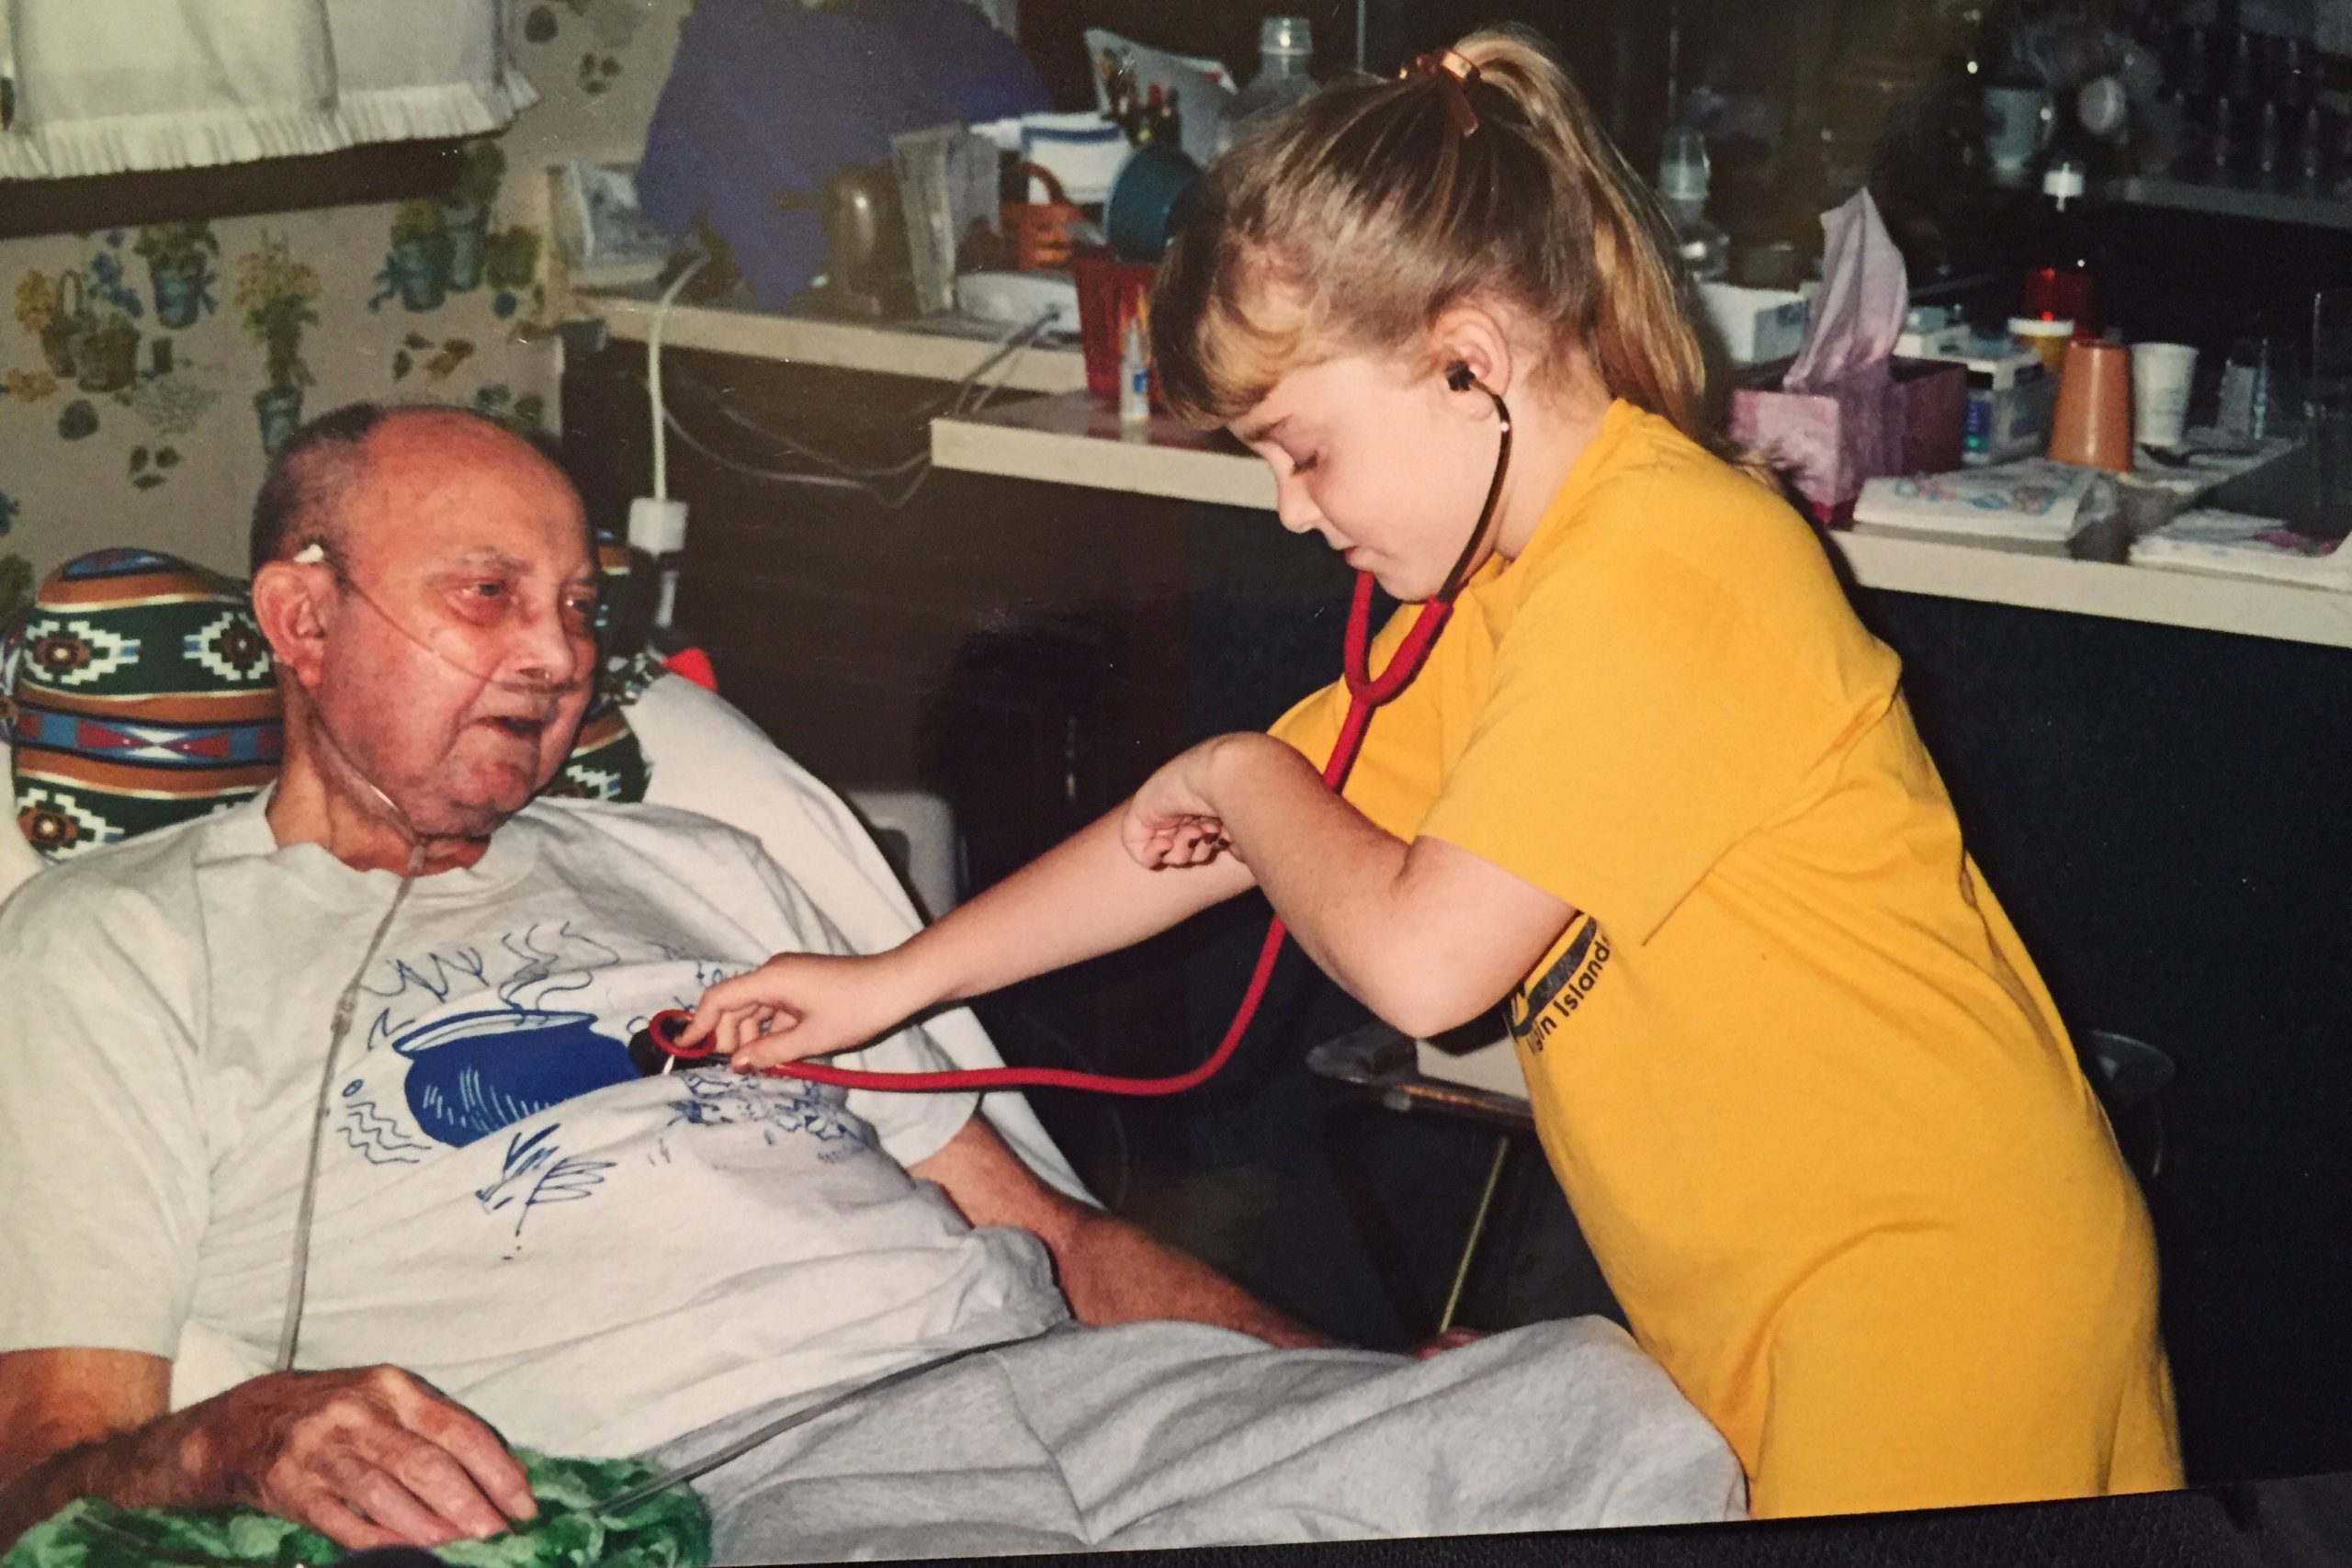 Marisa Weaver as a child, listening to her grandfather's heart with a stethoscope